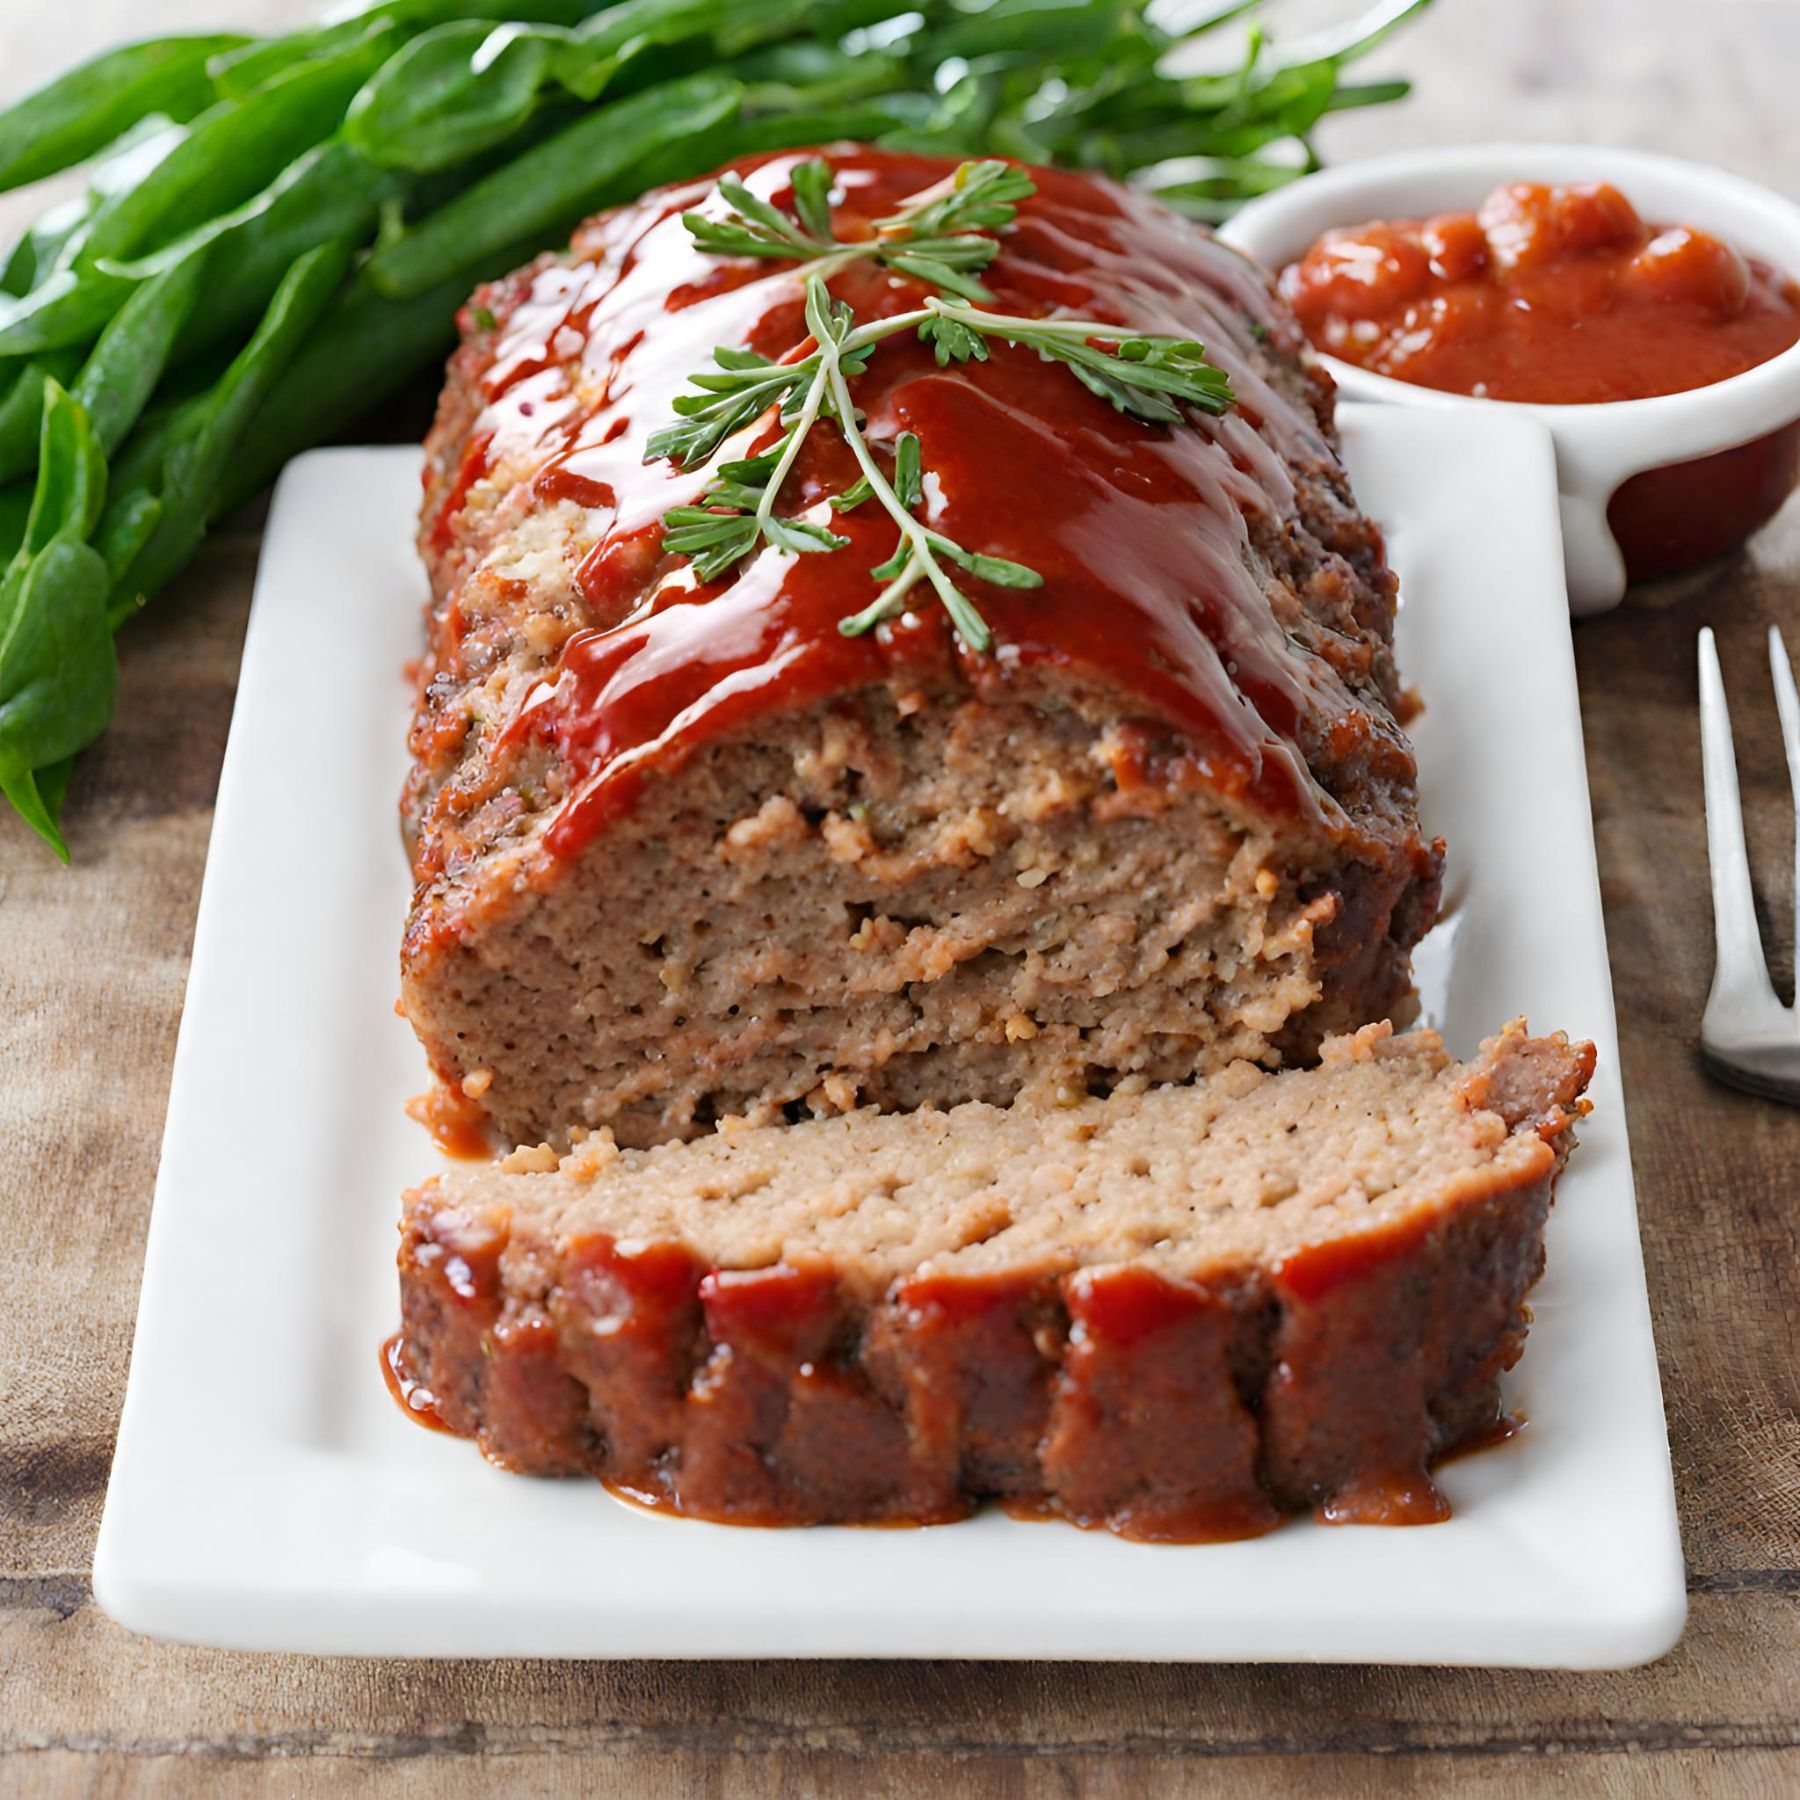 How To Make A Meatloaf Recipe 